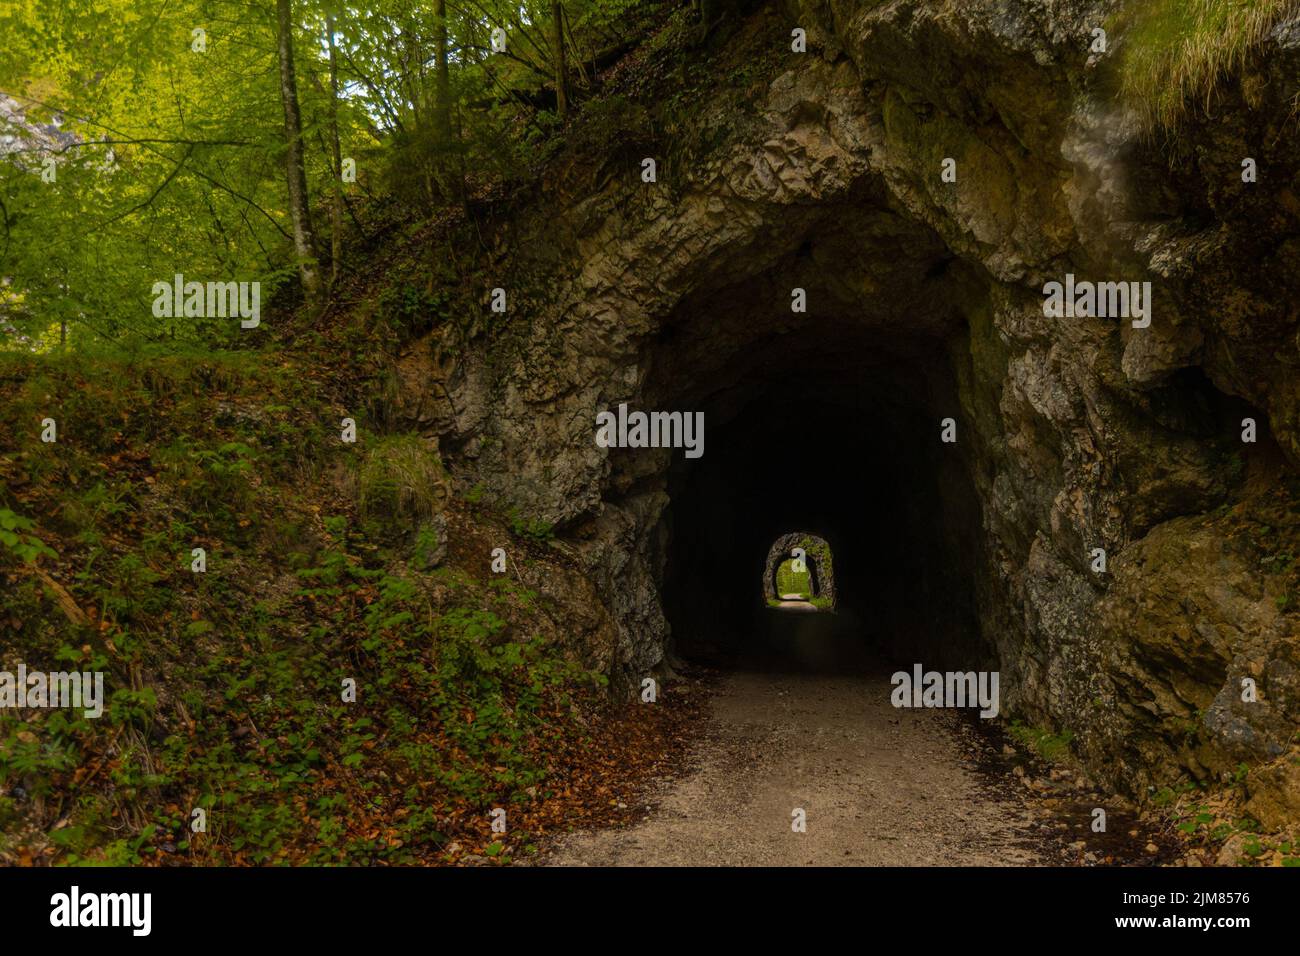 Tunnels in the ex Reichraming narrow gauge railway, small gauge forest railway in central austria. Visible two tunnel portals. Stock Photo